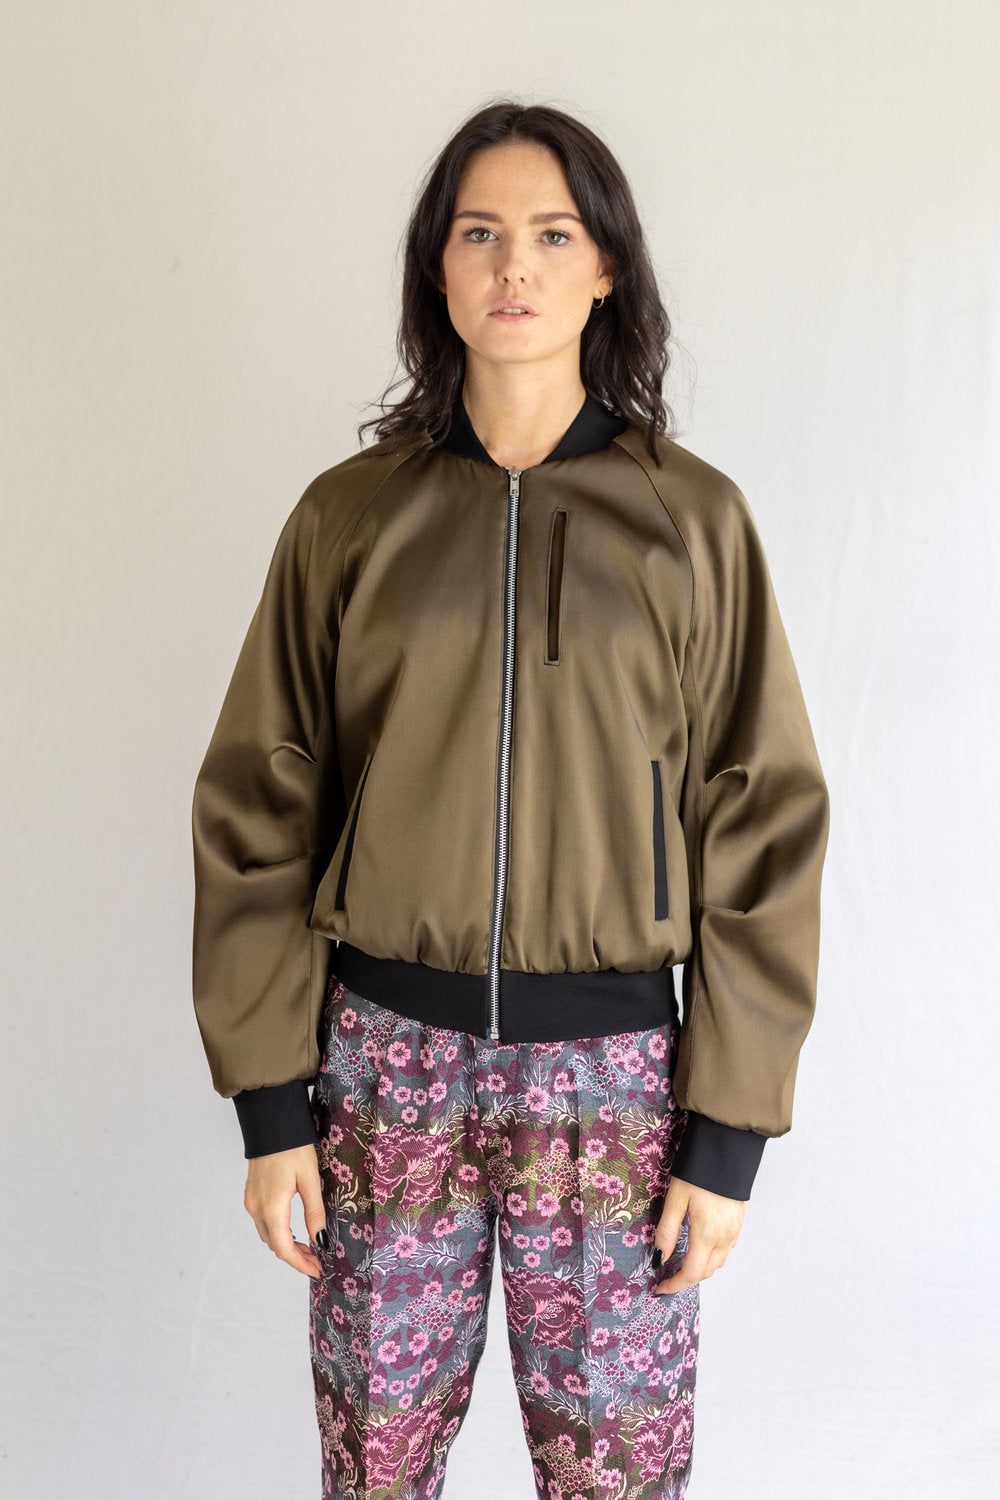 Trend Patterns TPC4 The Bomber Jacket